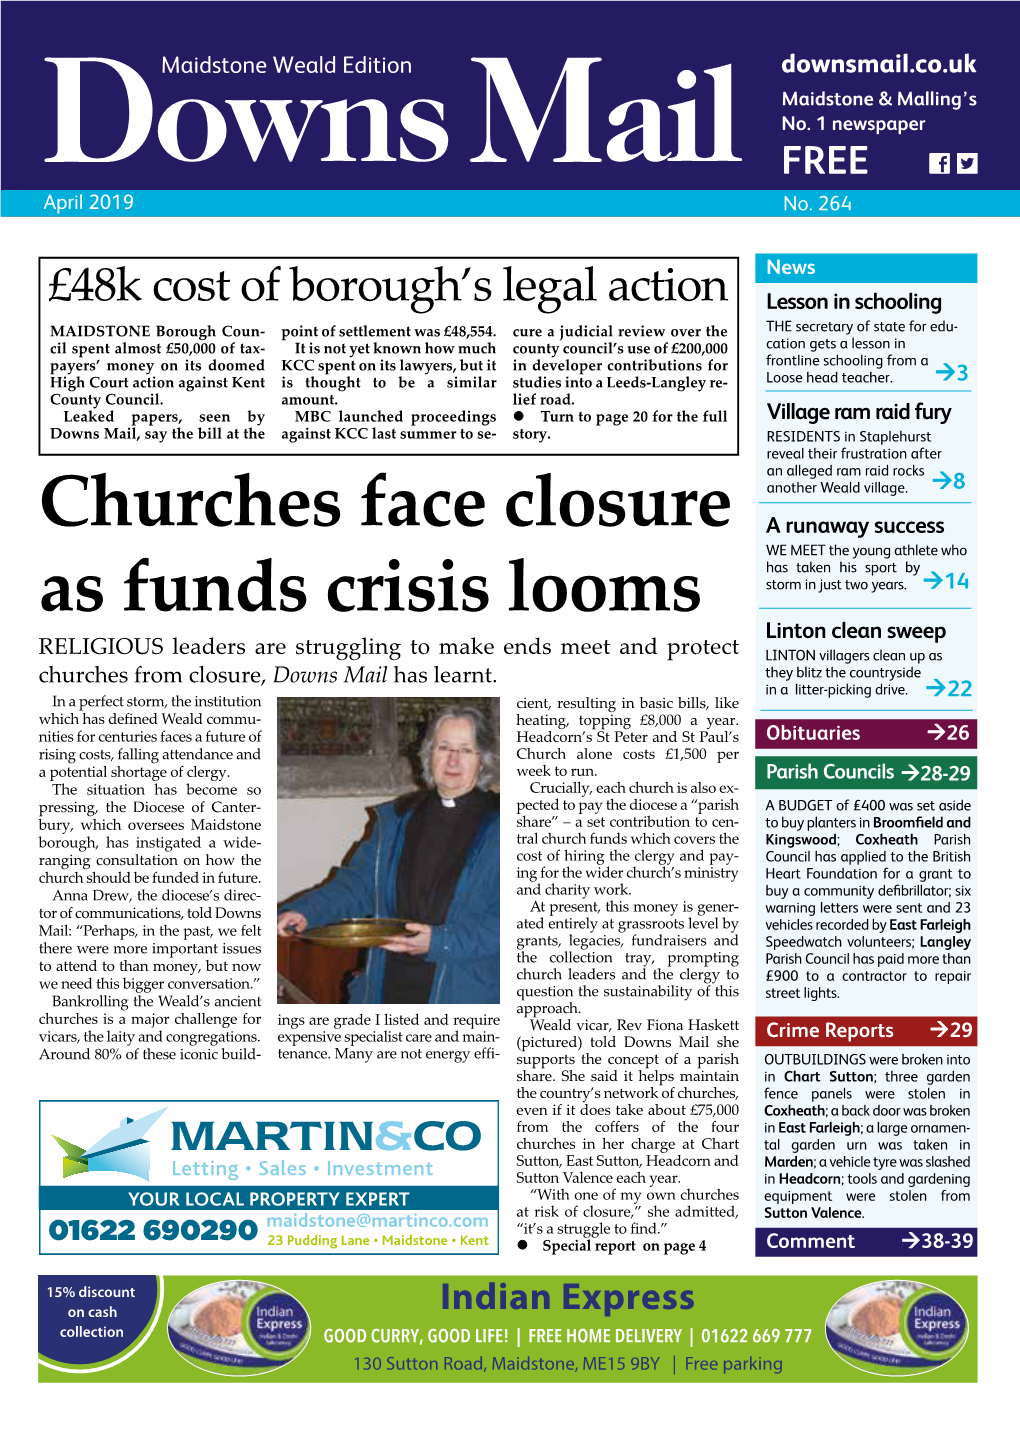 Churches Face Closure As Funds Crisis Looms